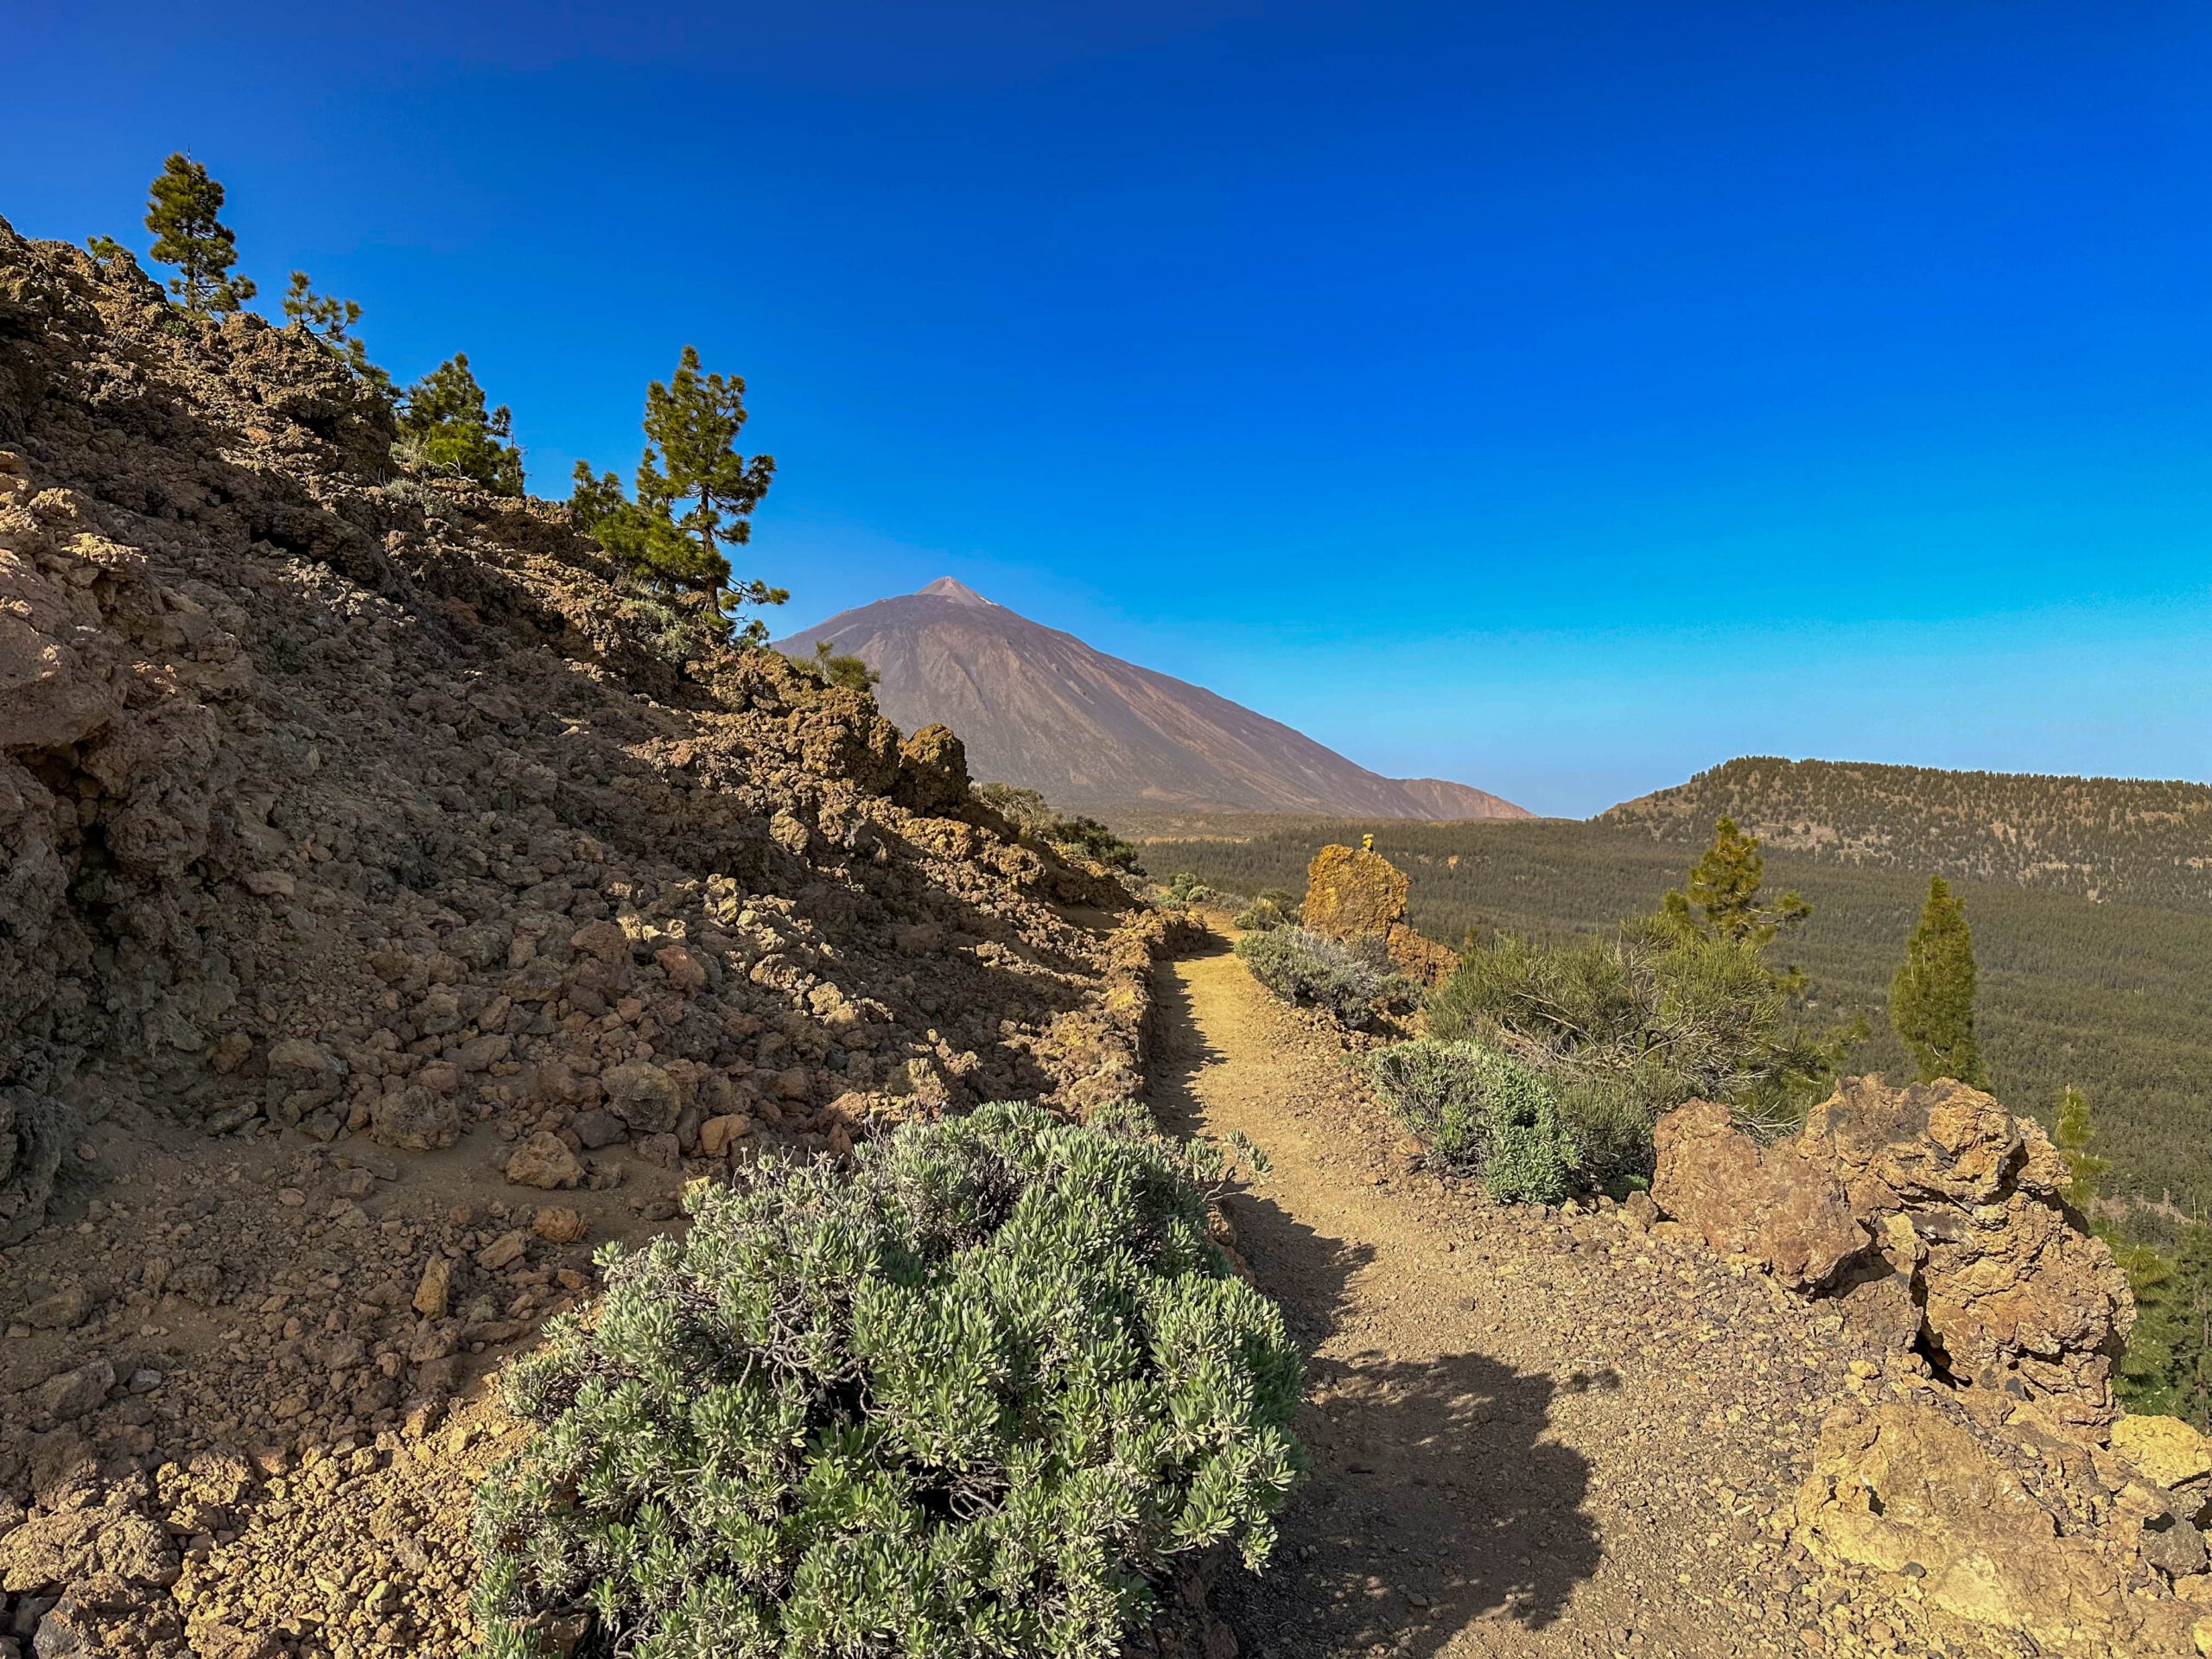 View from the hiking trail GR 131 to the Teide